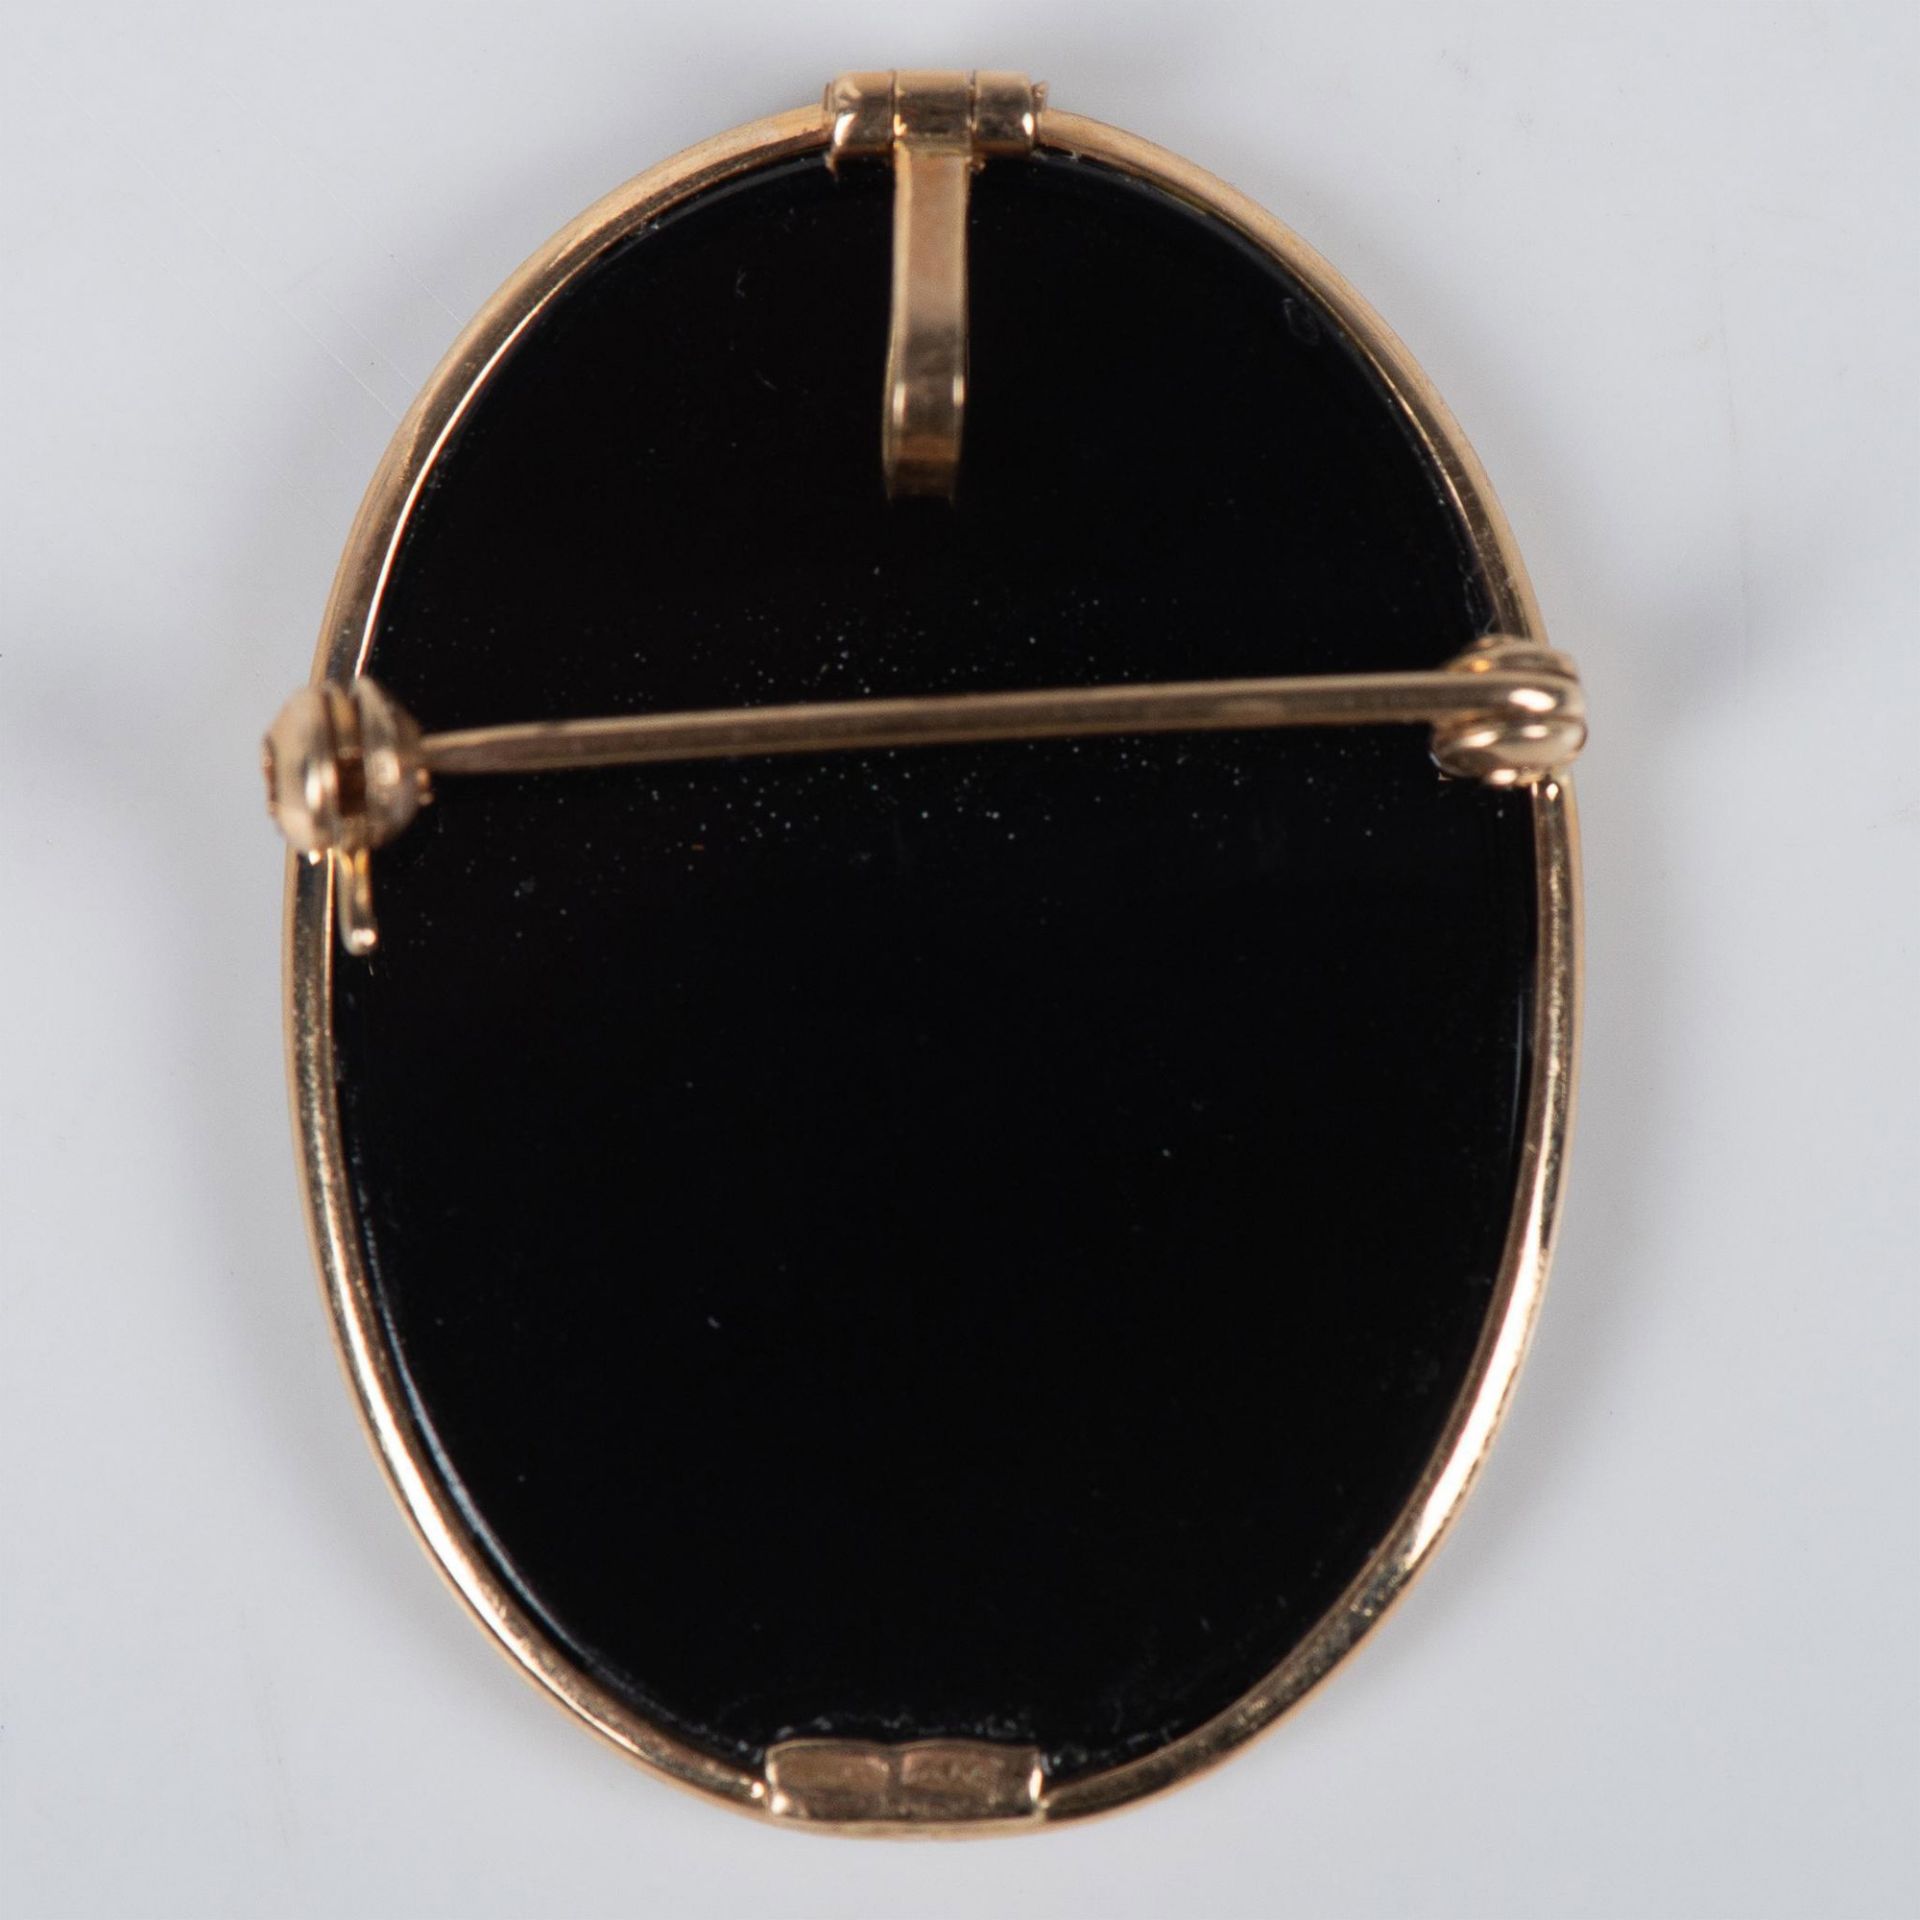 14k Gold and Blue Agate Cameo - Image 2 of 3